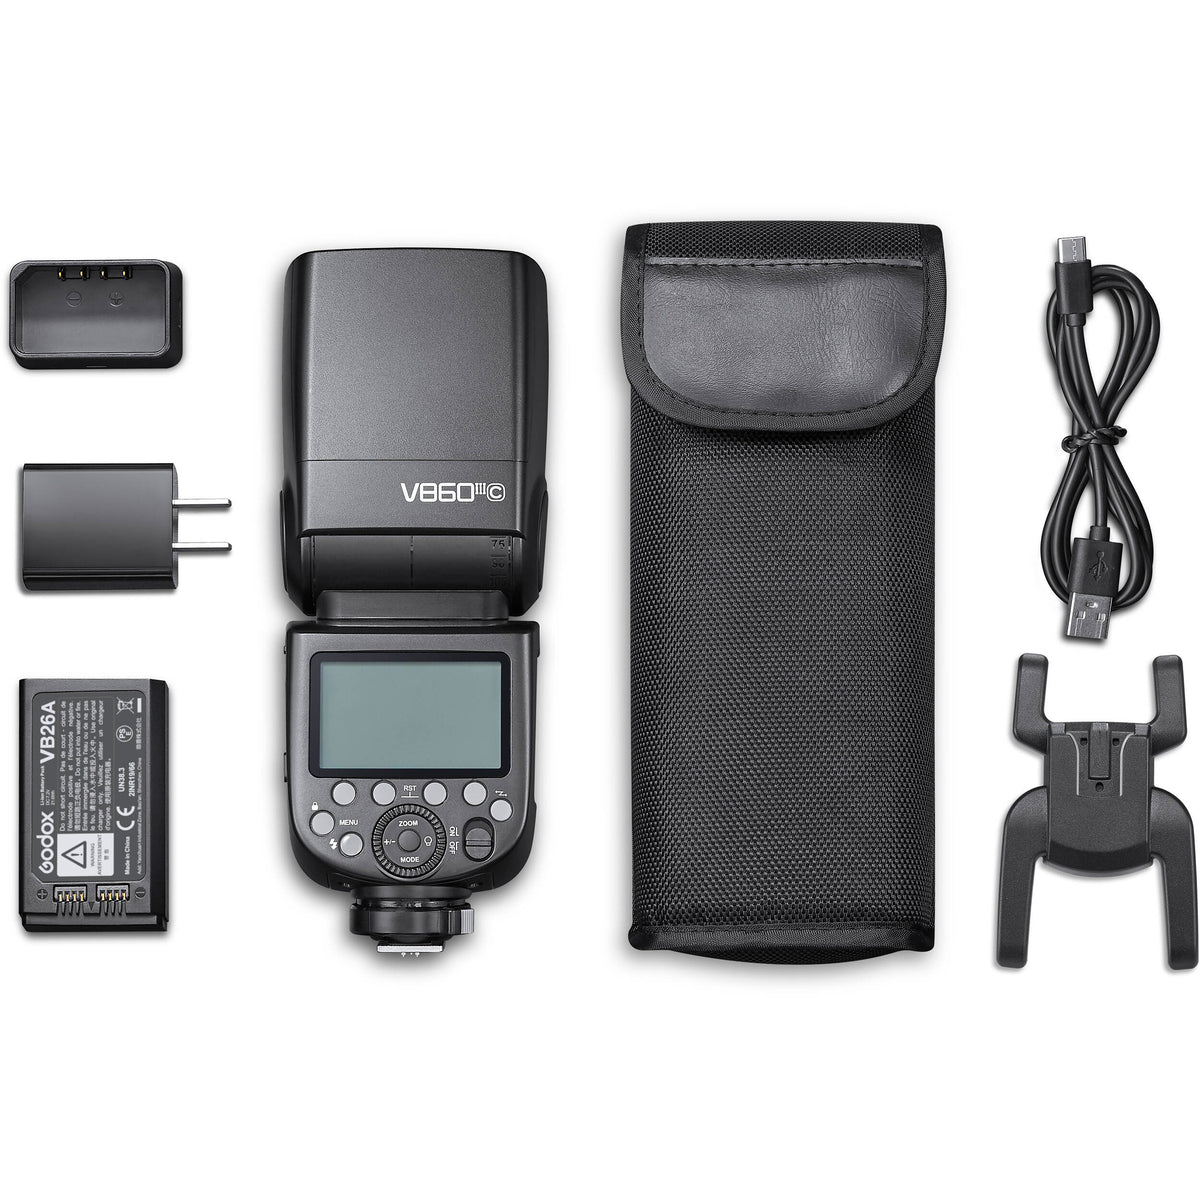 Flash godox • Compare (100+ products) find best prices »